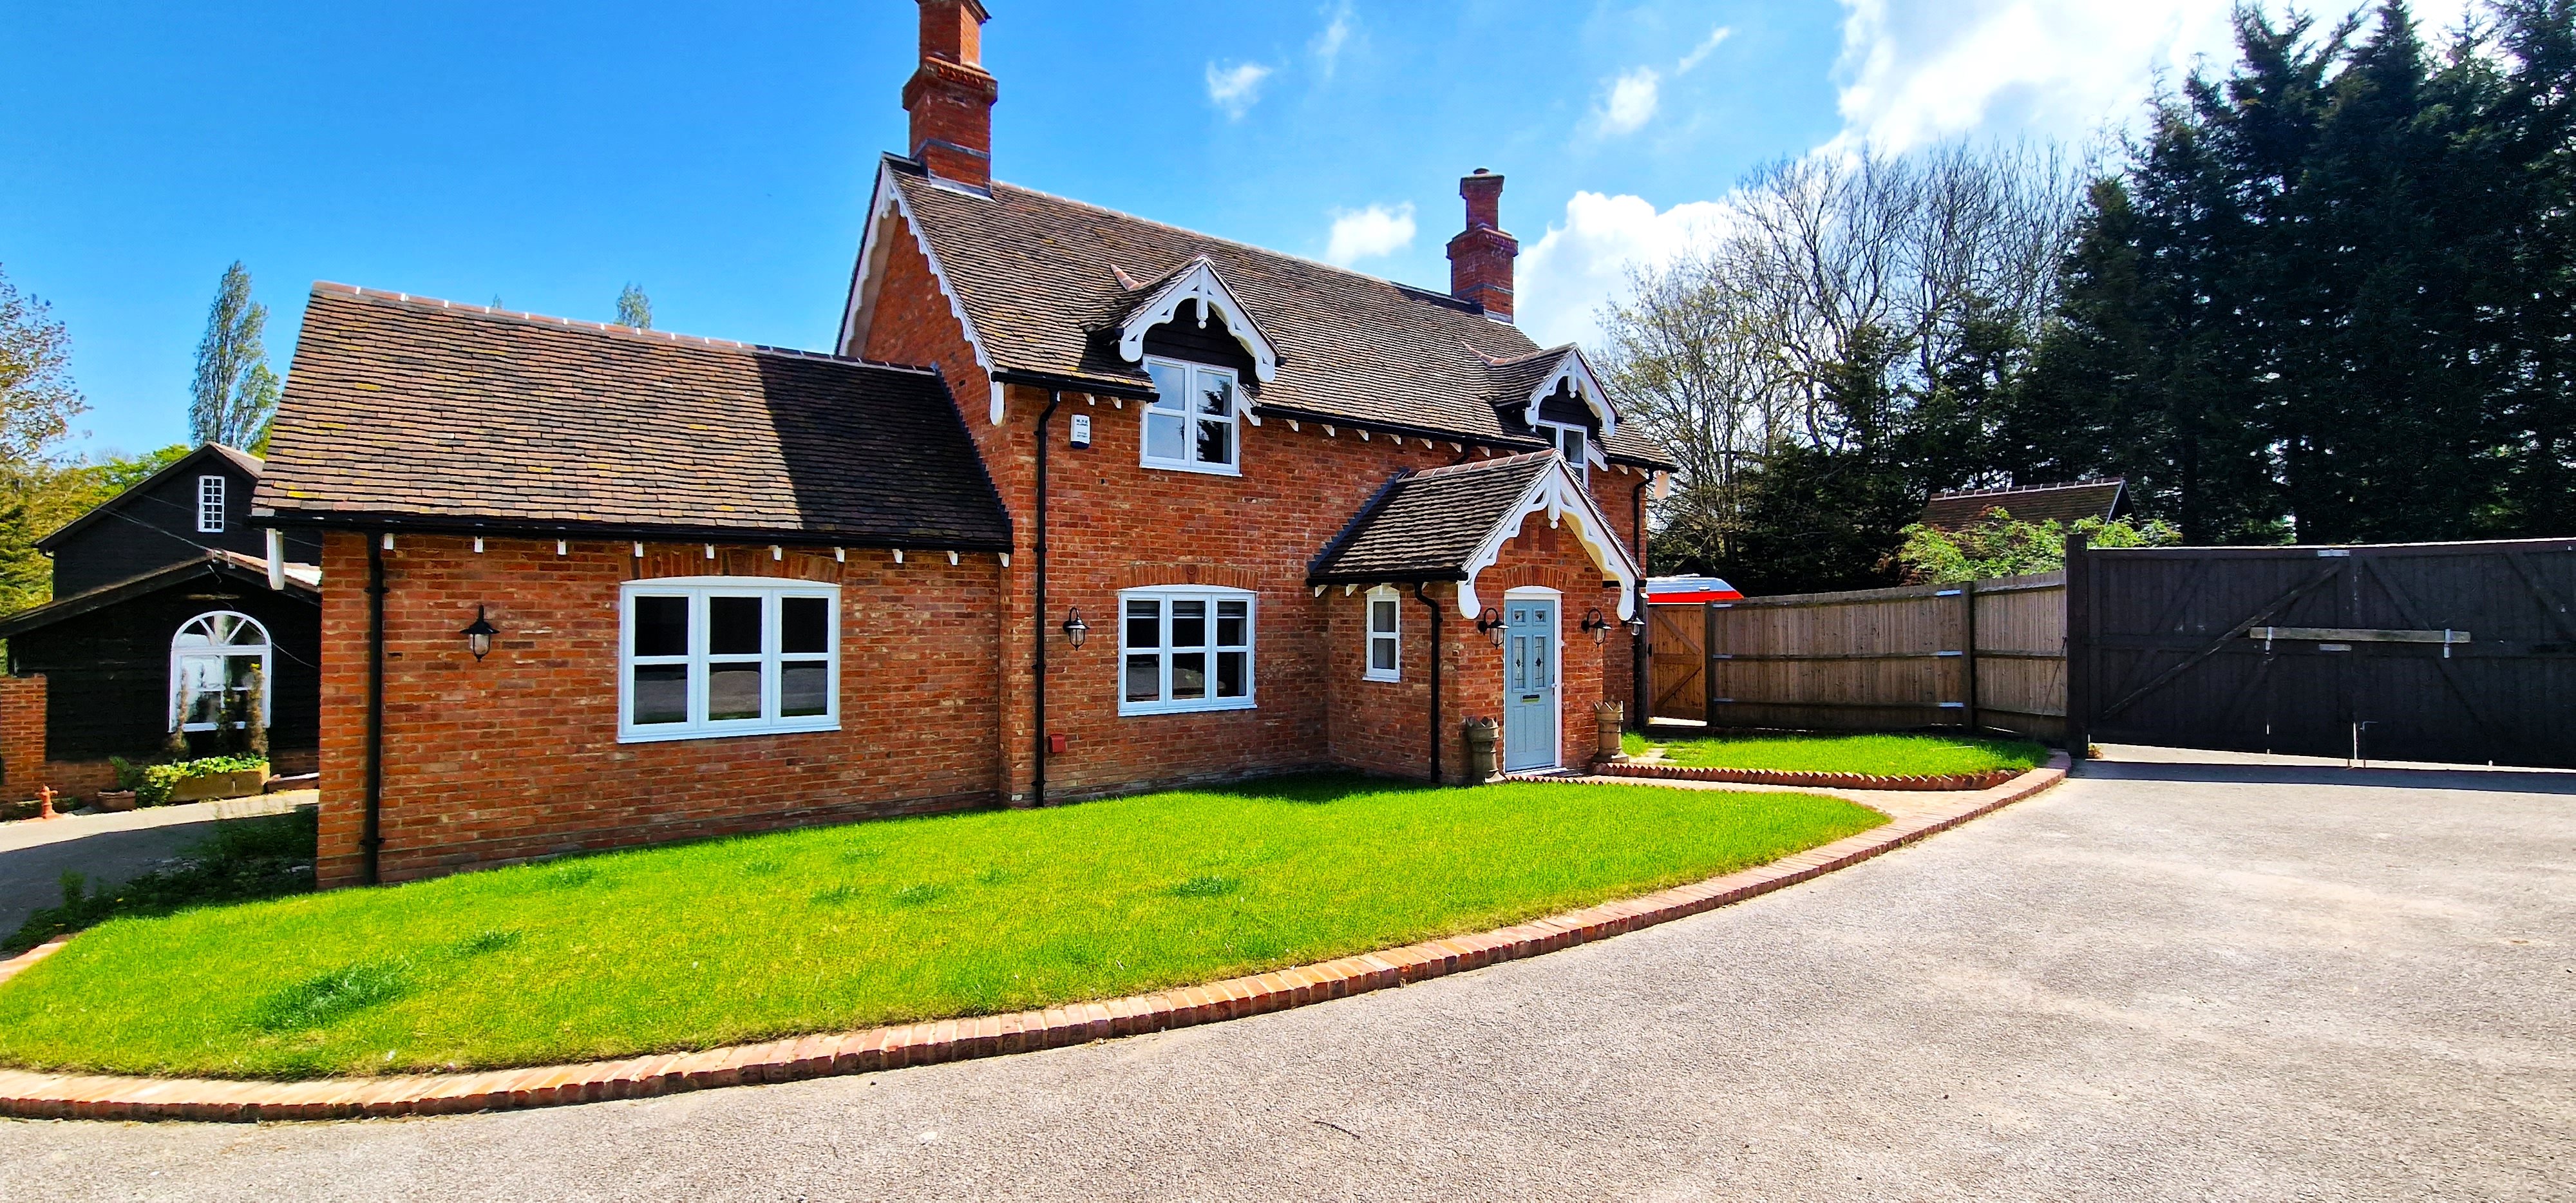 4 bed detached house to rent in Rettendon Old Hall, Rettendon Common  - Property Image 1